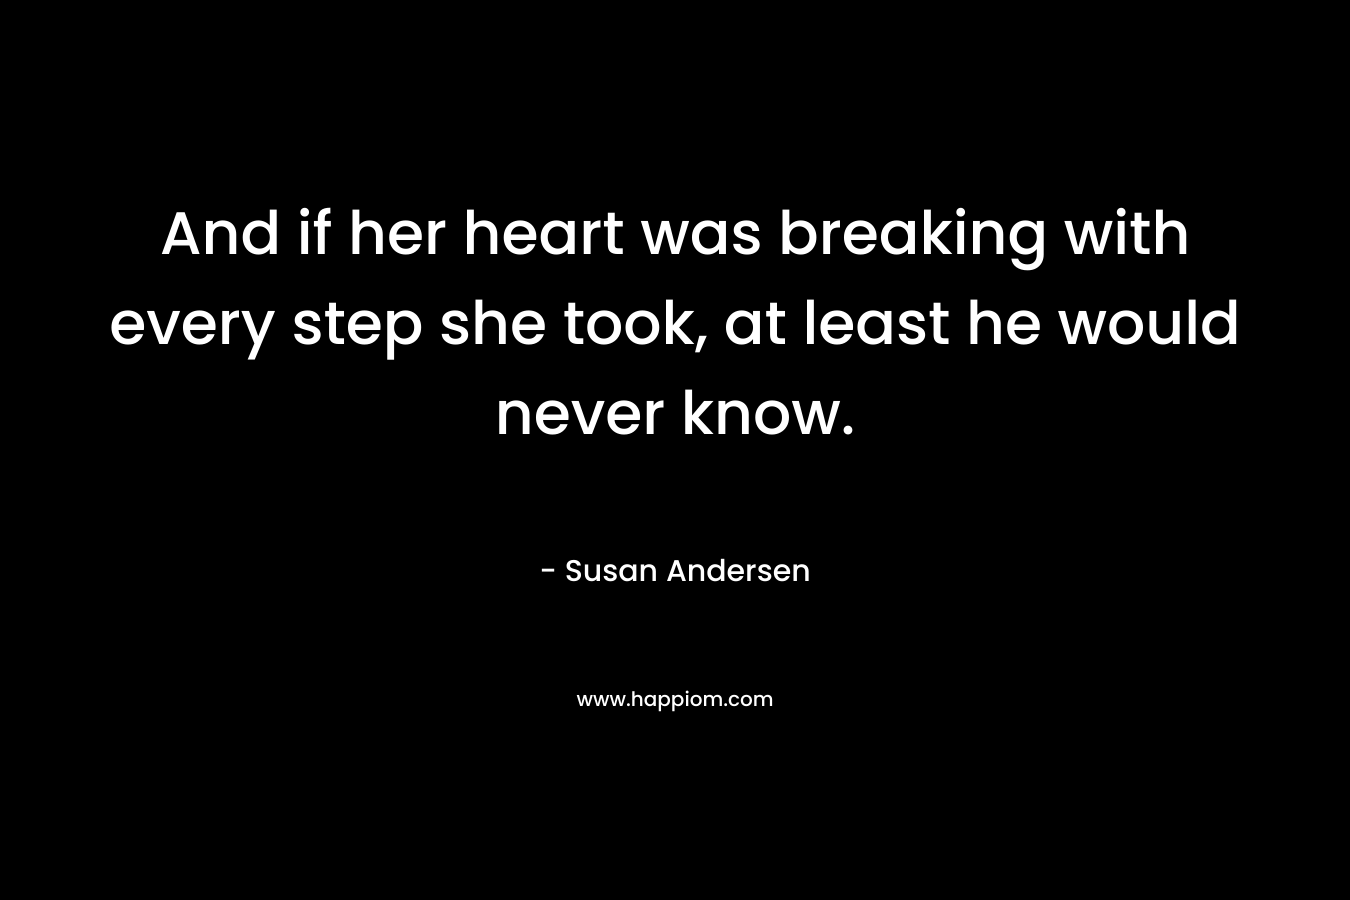 And if her heart was breaking with every step she took, at least he would never know. – Susan Andersen